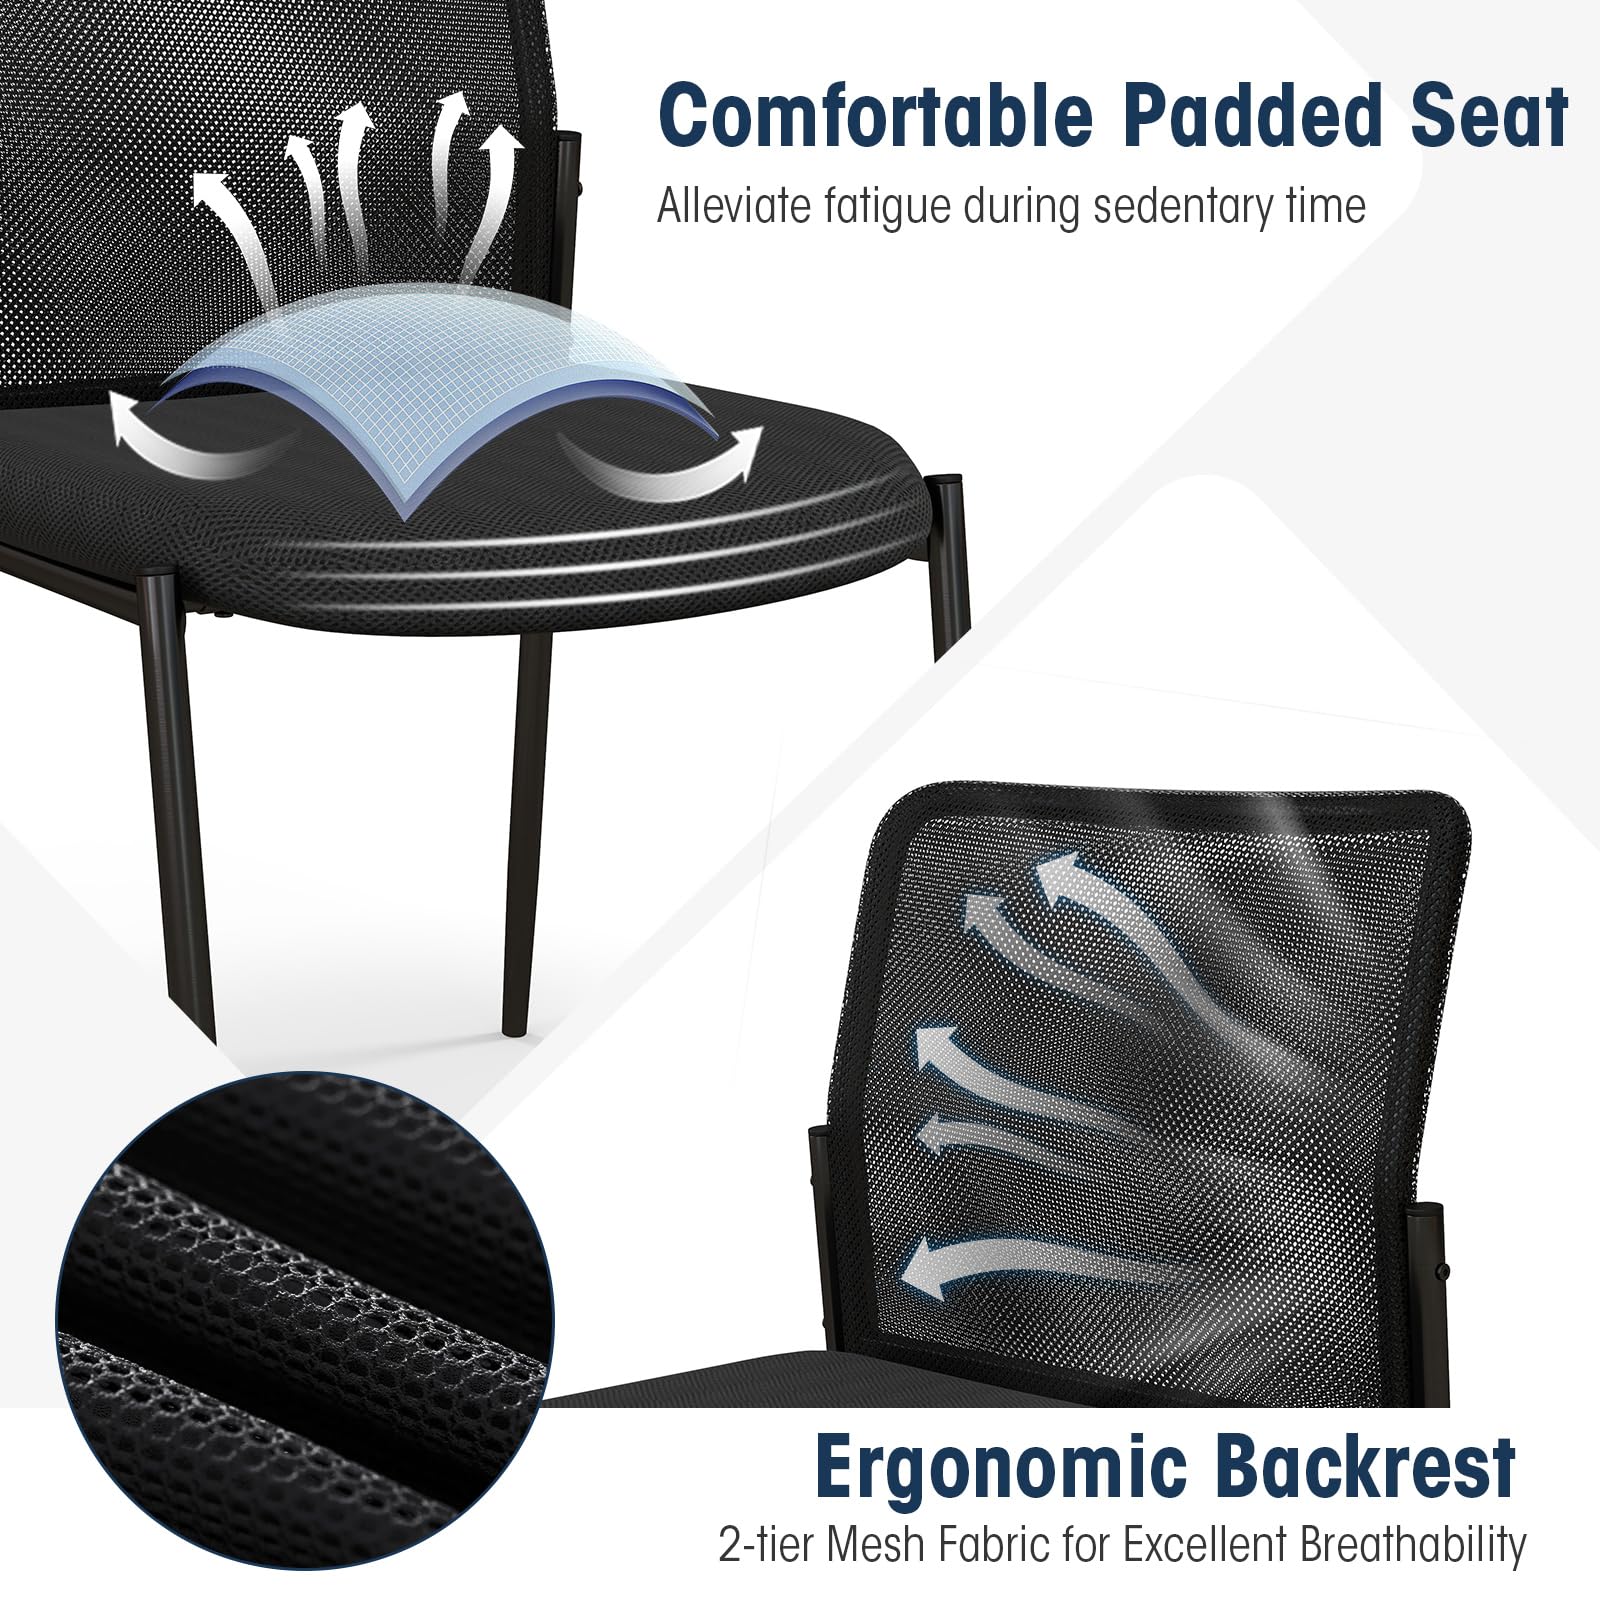 Giantex Waiting Room Chairs - Stackable Guest Chairs w/Ergonomic Backrest